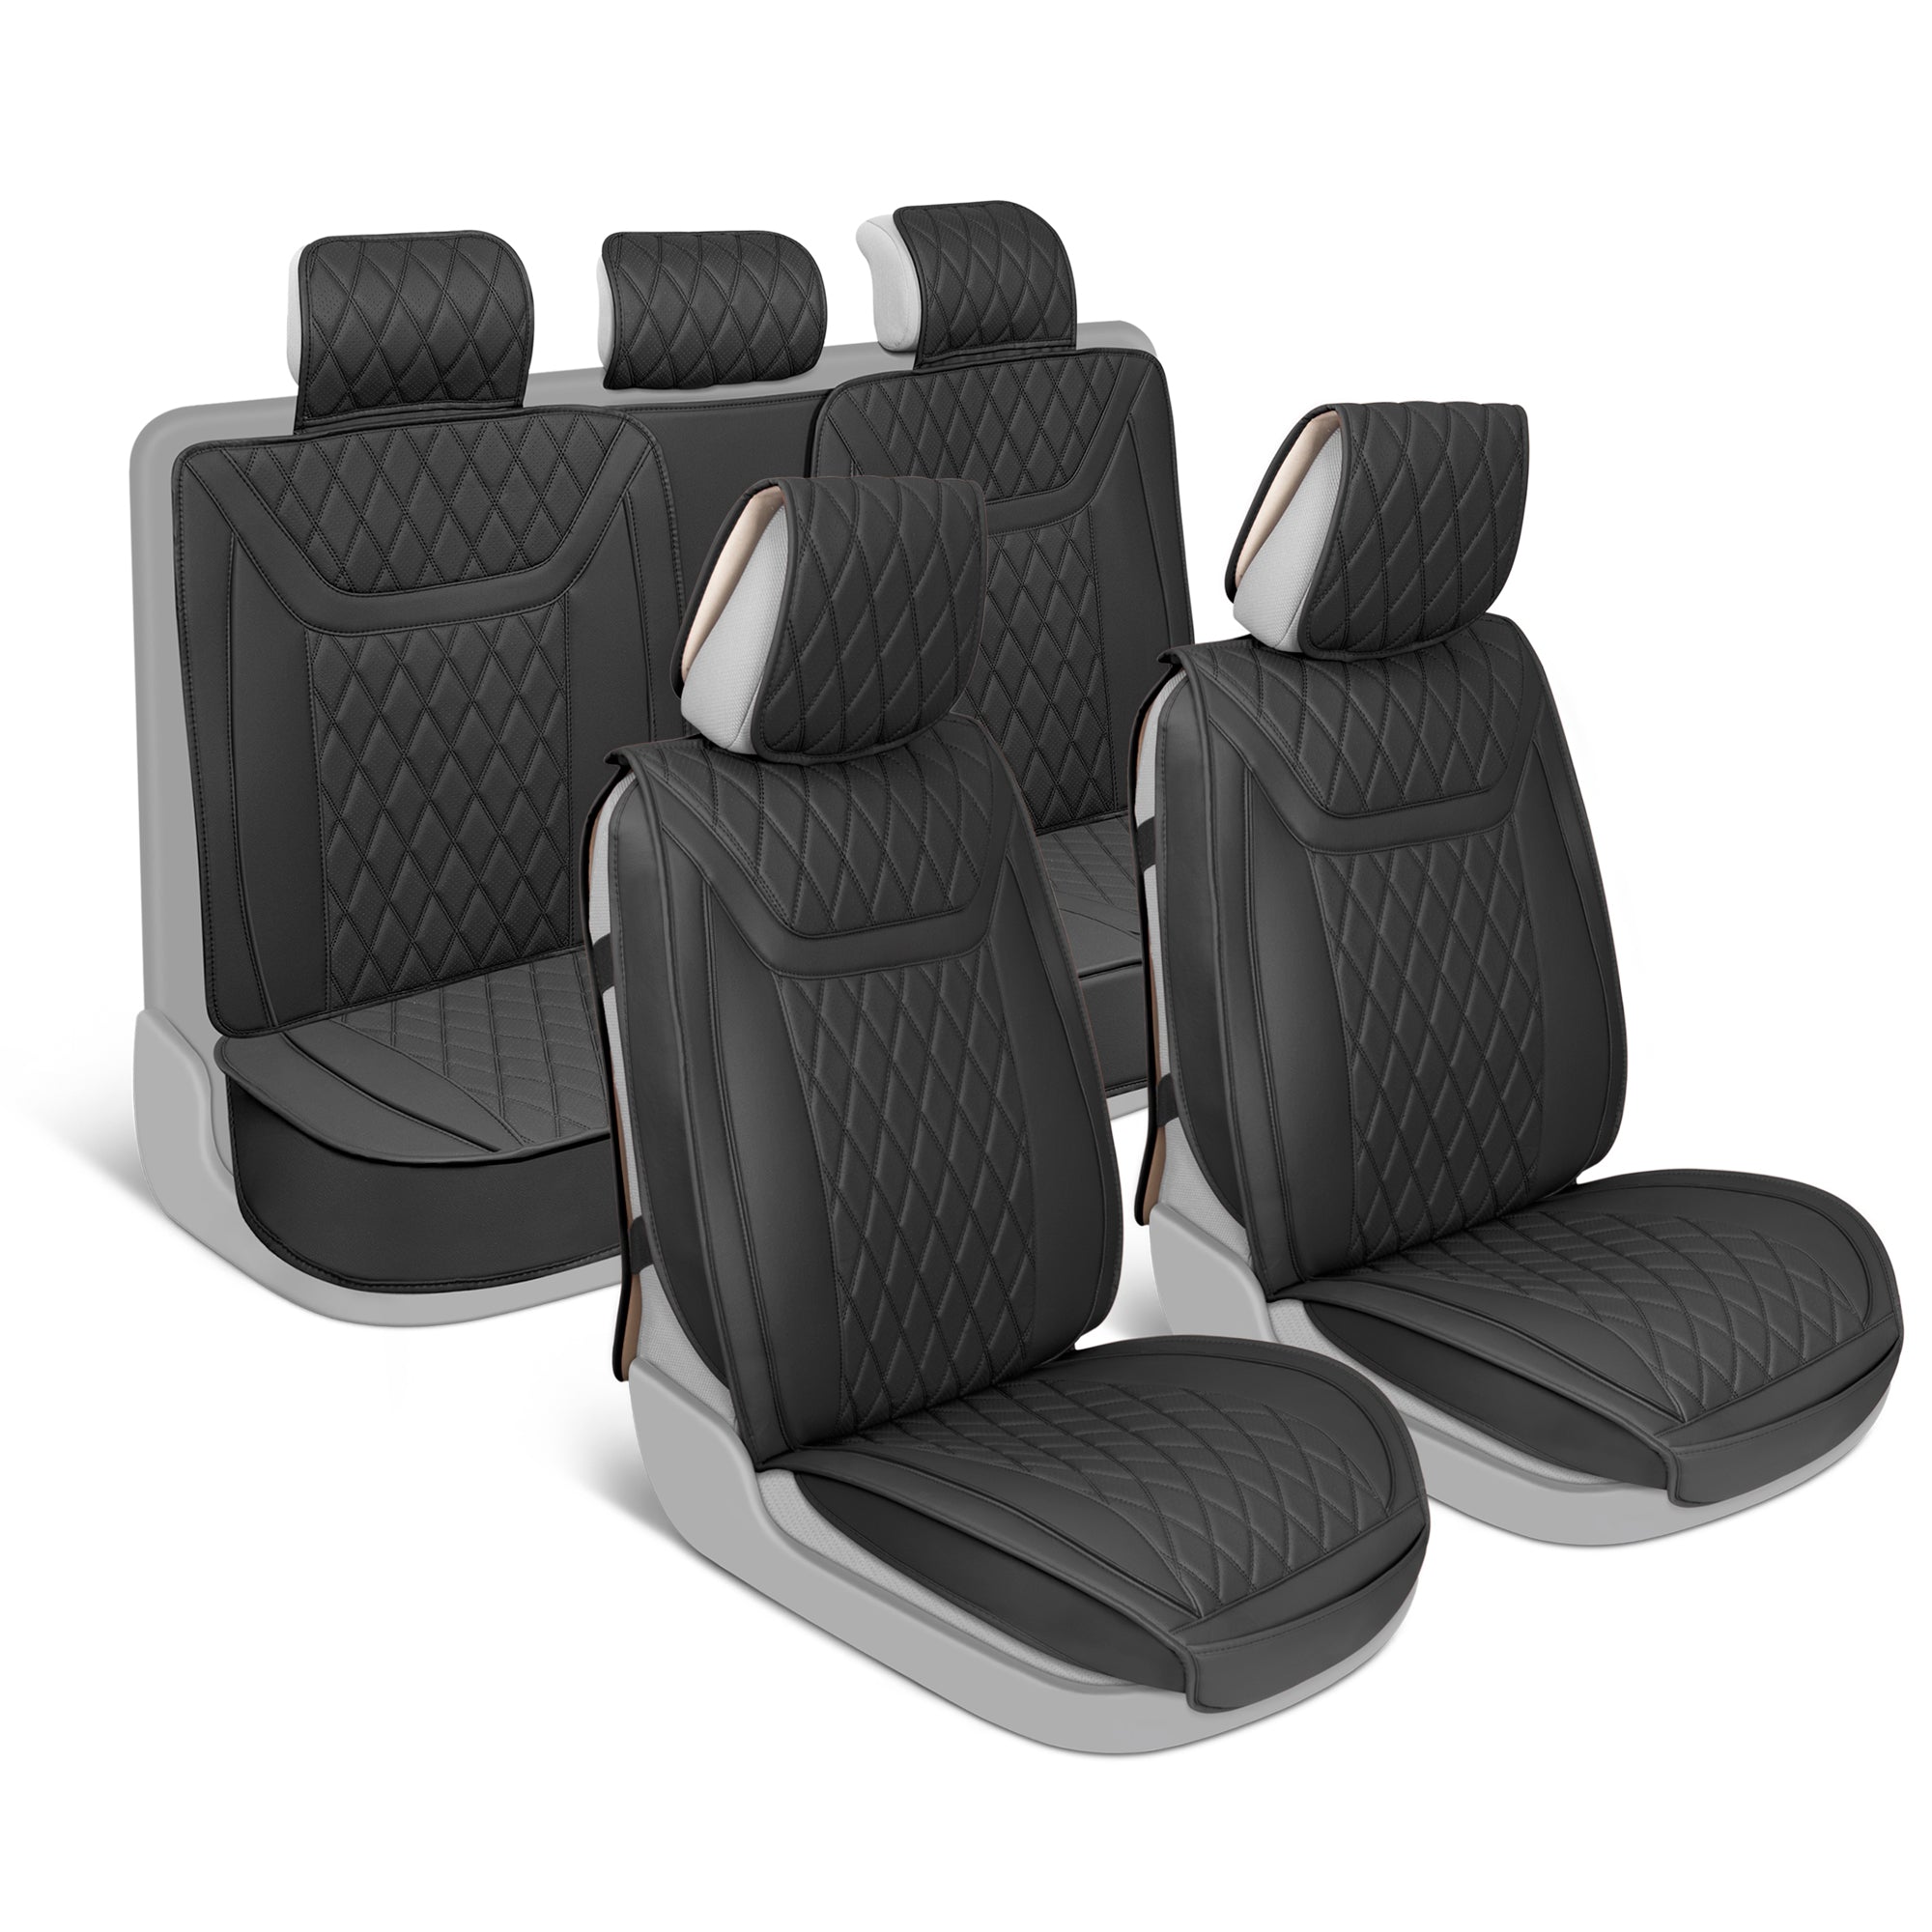 MotorBox Car Seat Covers – Ranch Leatherette Faux Leather Black Seat Covers for Car – Diamond Stitched Cushioned Seat Protectors for Automotive Accessories, Trucks, SUV, Car – Full Set - Black